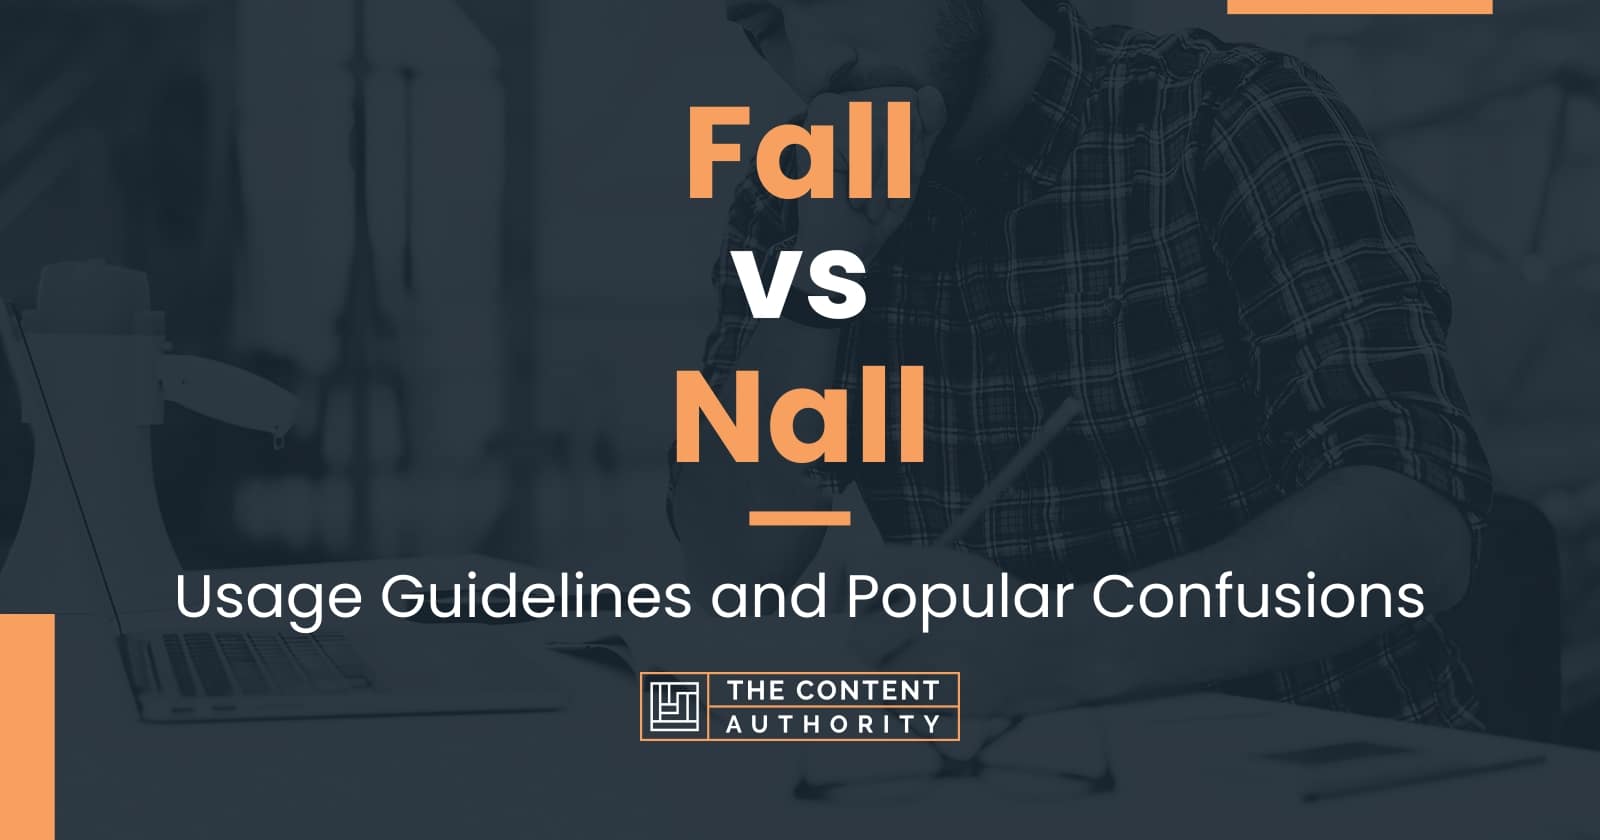 Fall vs Nall Usage Guidelines and Popular Confusions